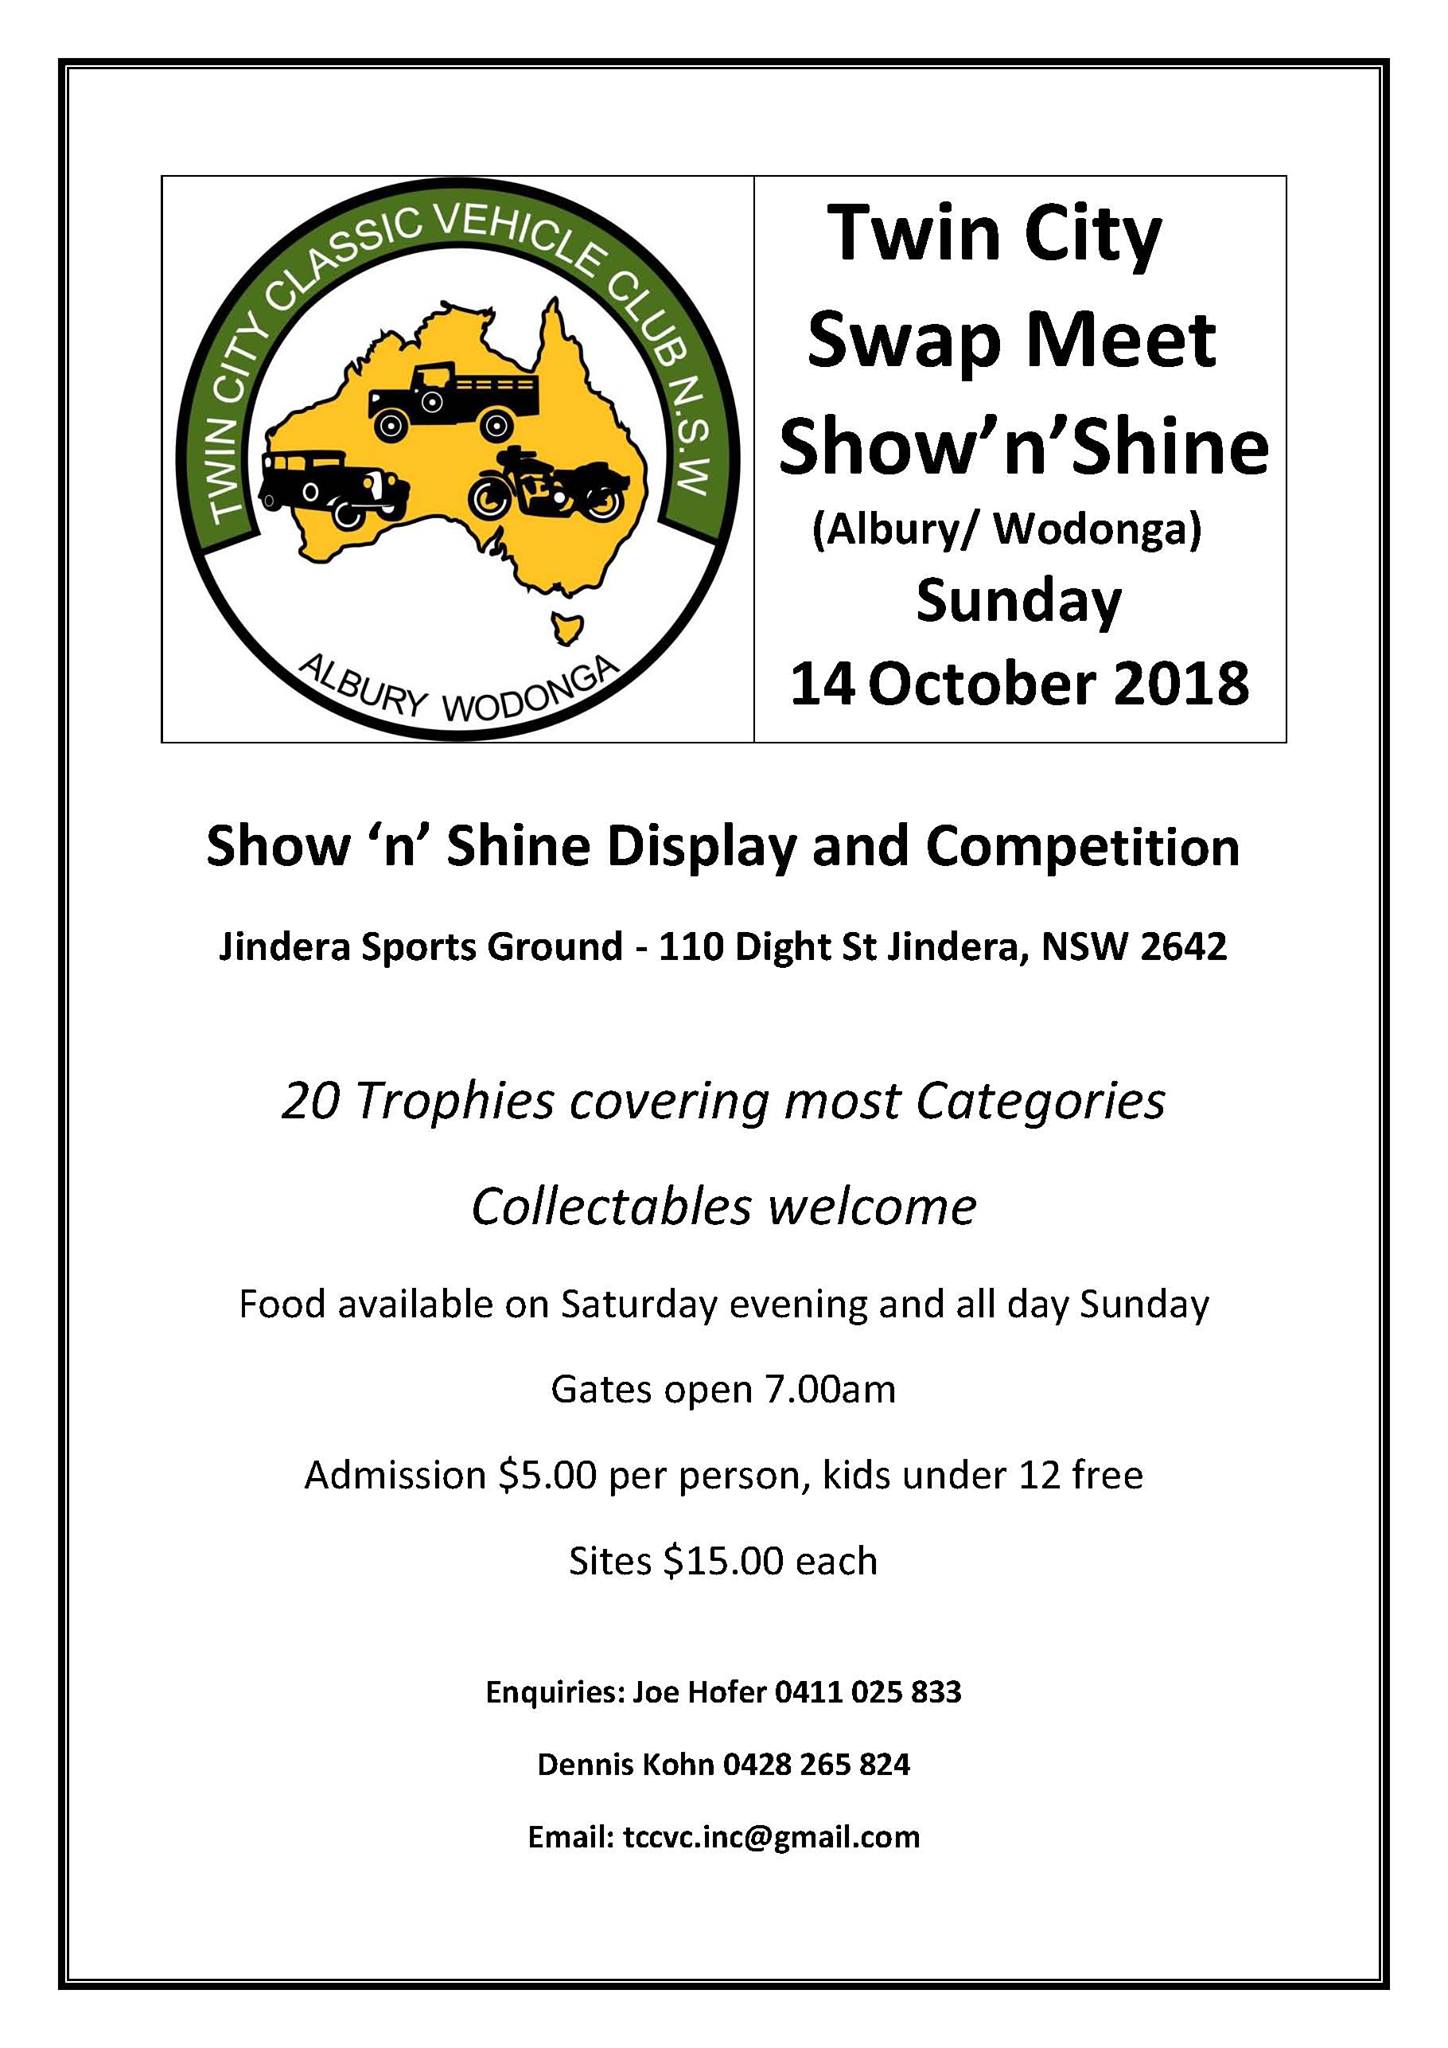 Twin City Classic Vehicle Club Swap Meet and Show and Shine [NSW]